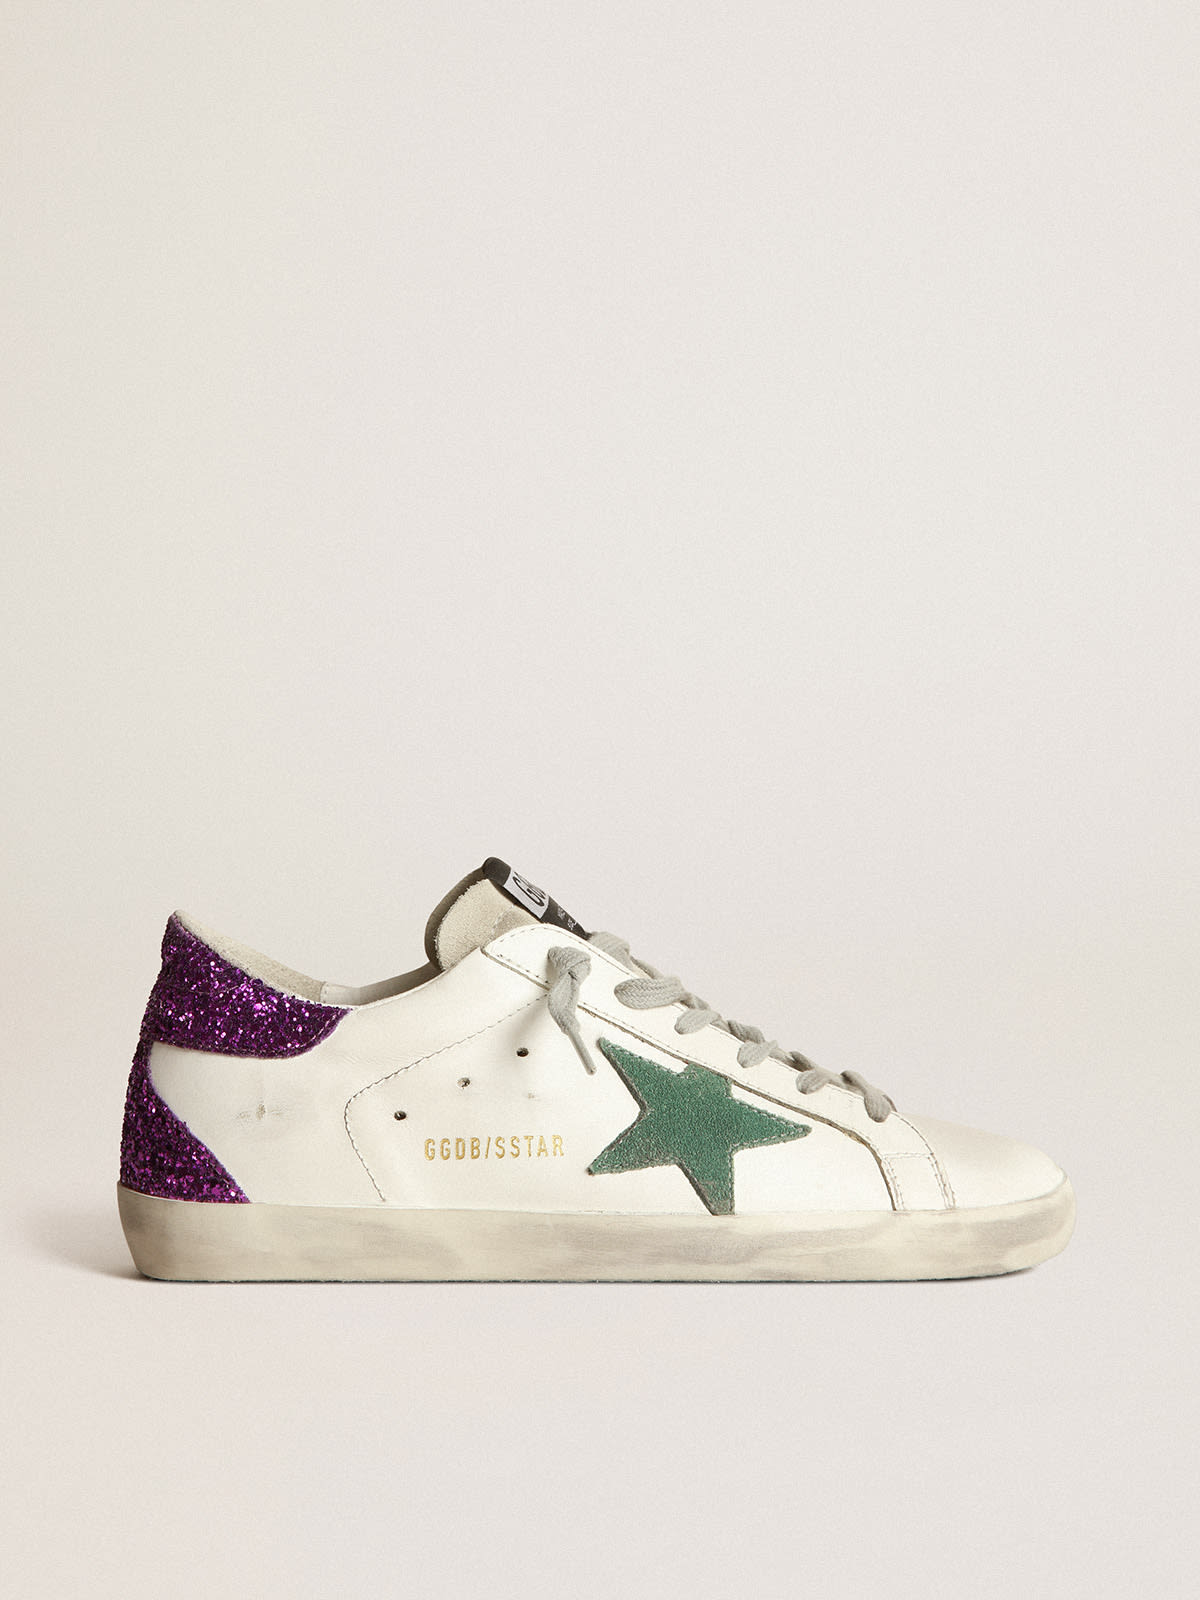 Golden Goose - White Super-Star sneakers with glittery purple rear in 